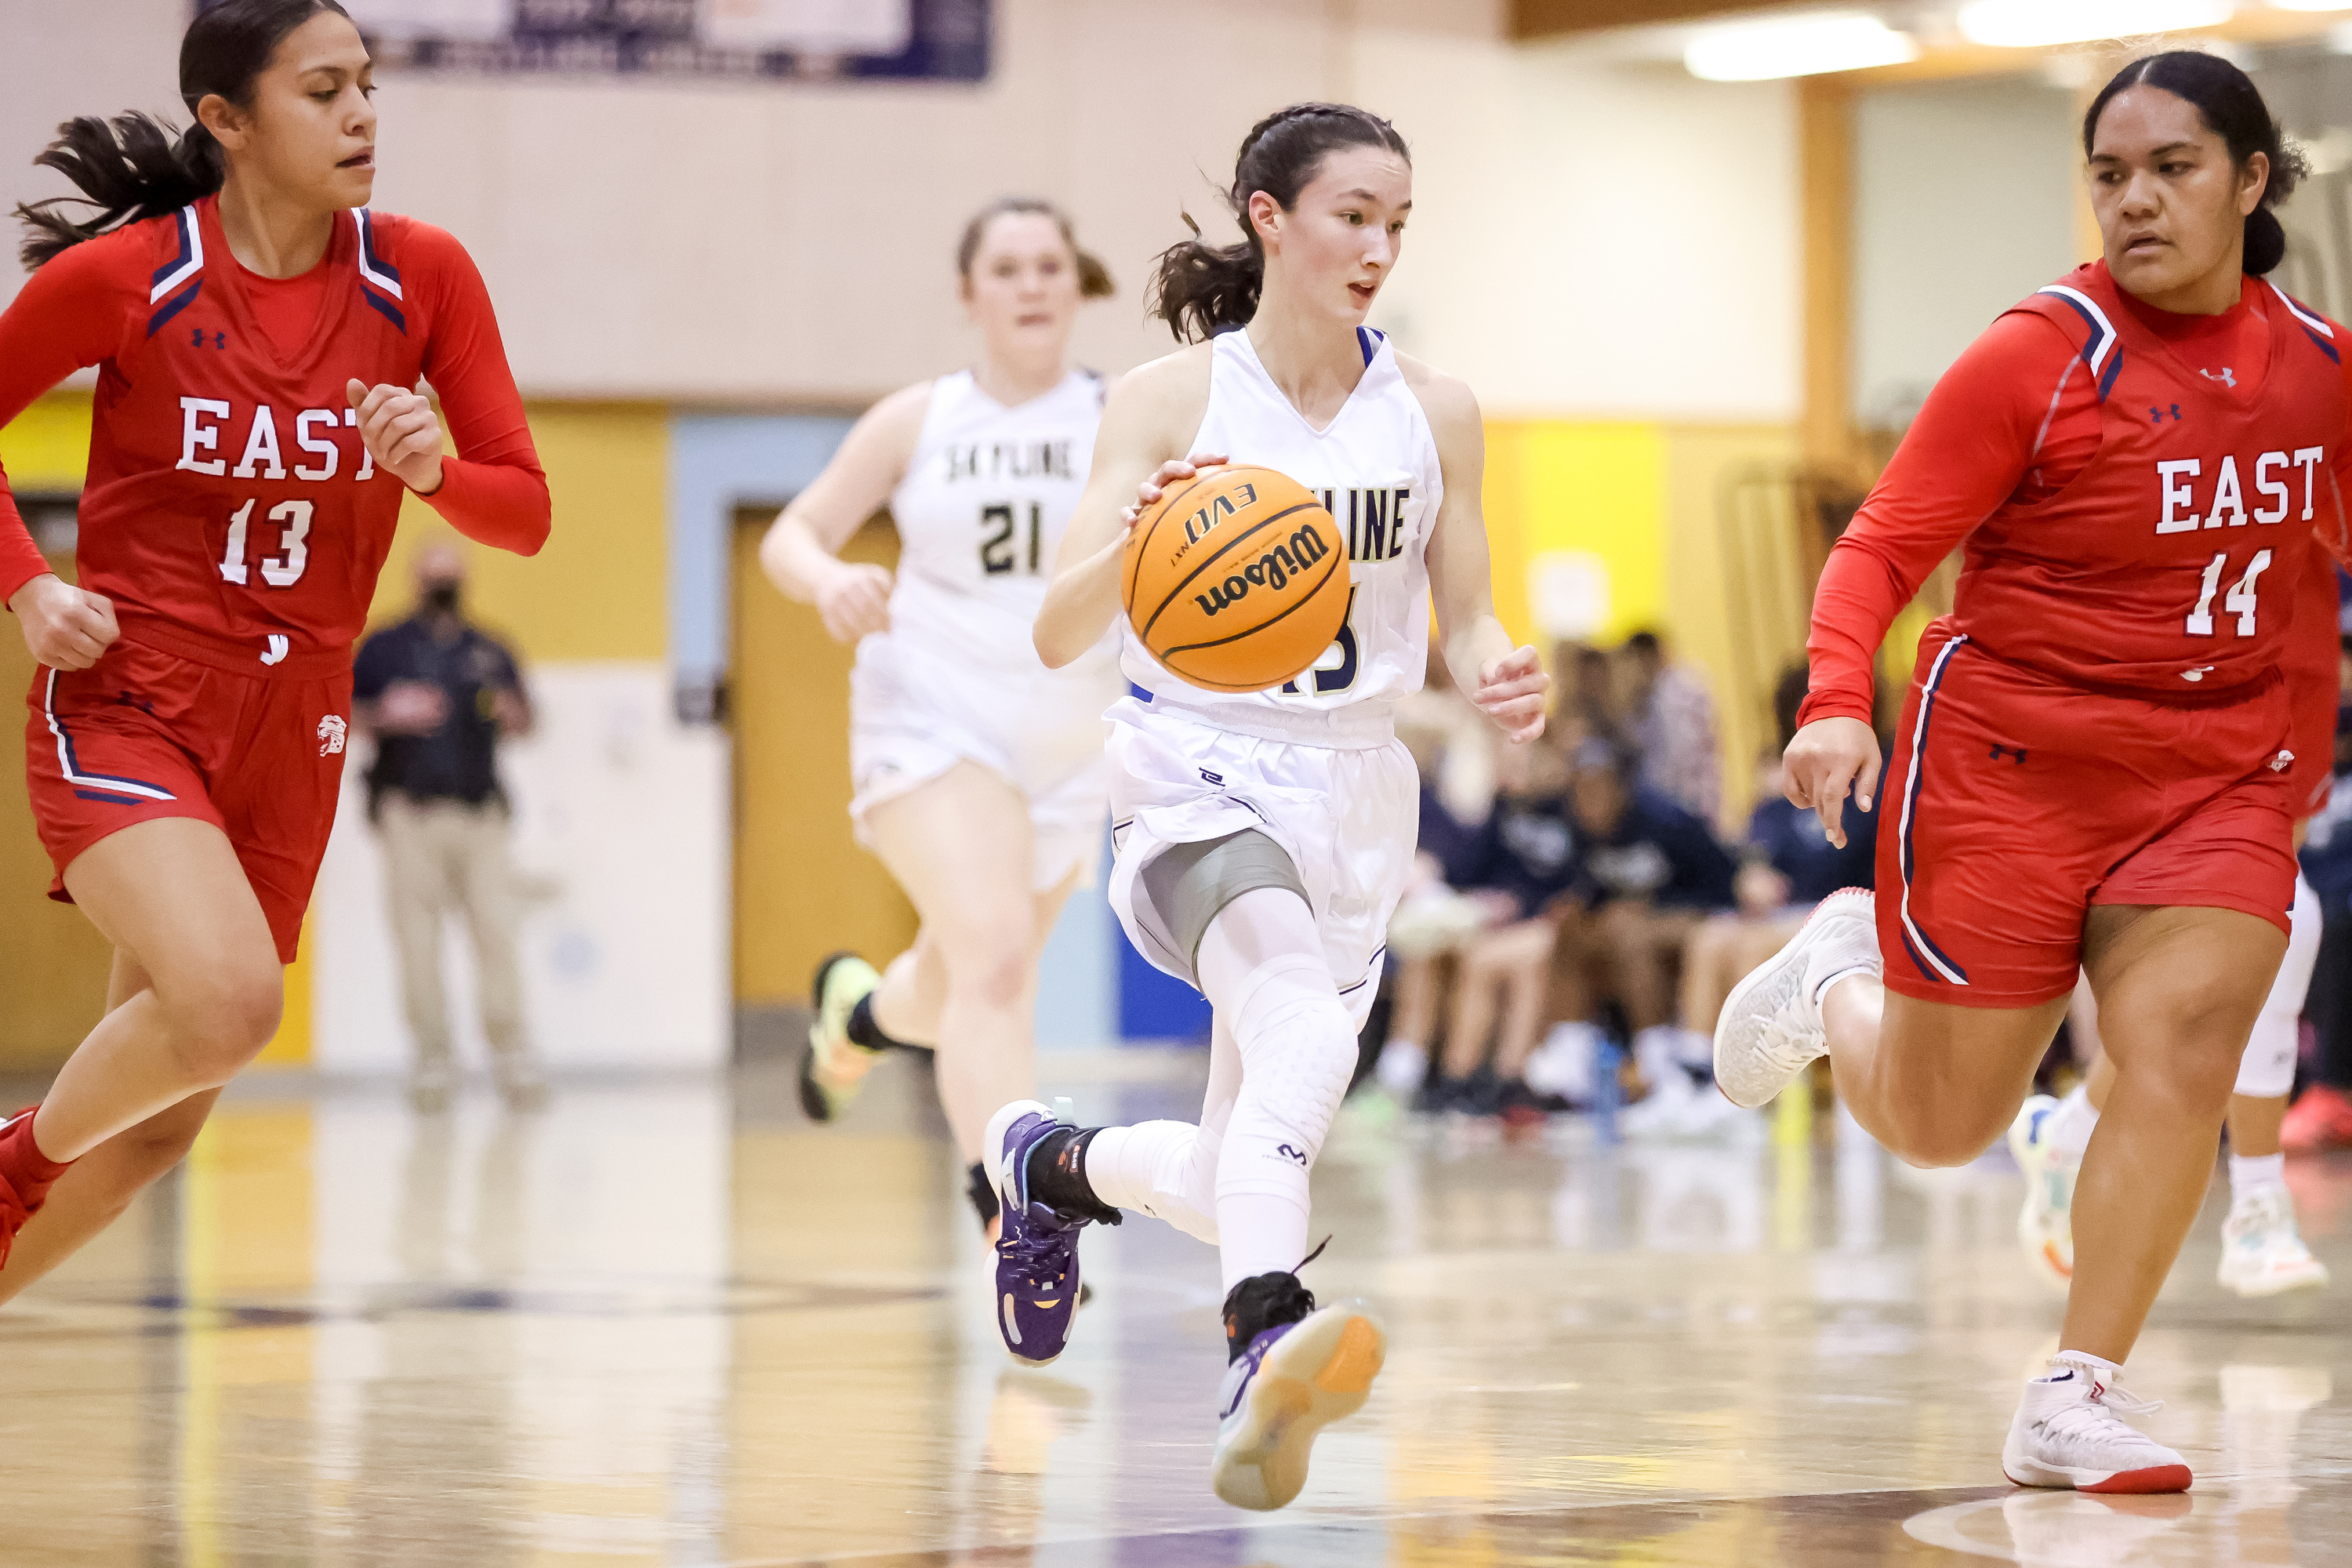 Skyline and East compete in a high school girls basketball game at Skyline High School in Millcreek on Tuesday, Jan. 18, 2022.